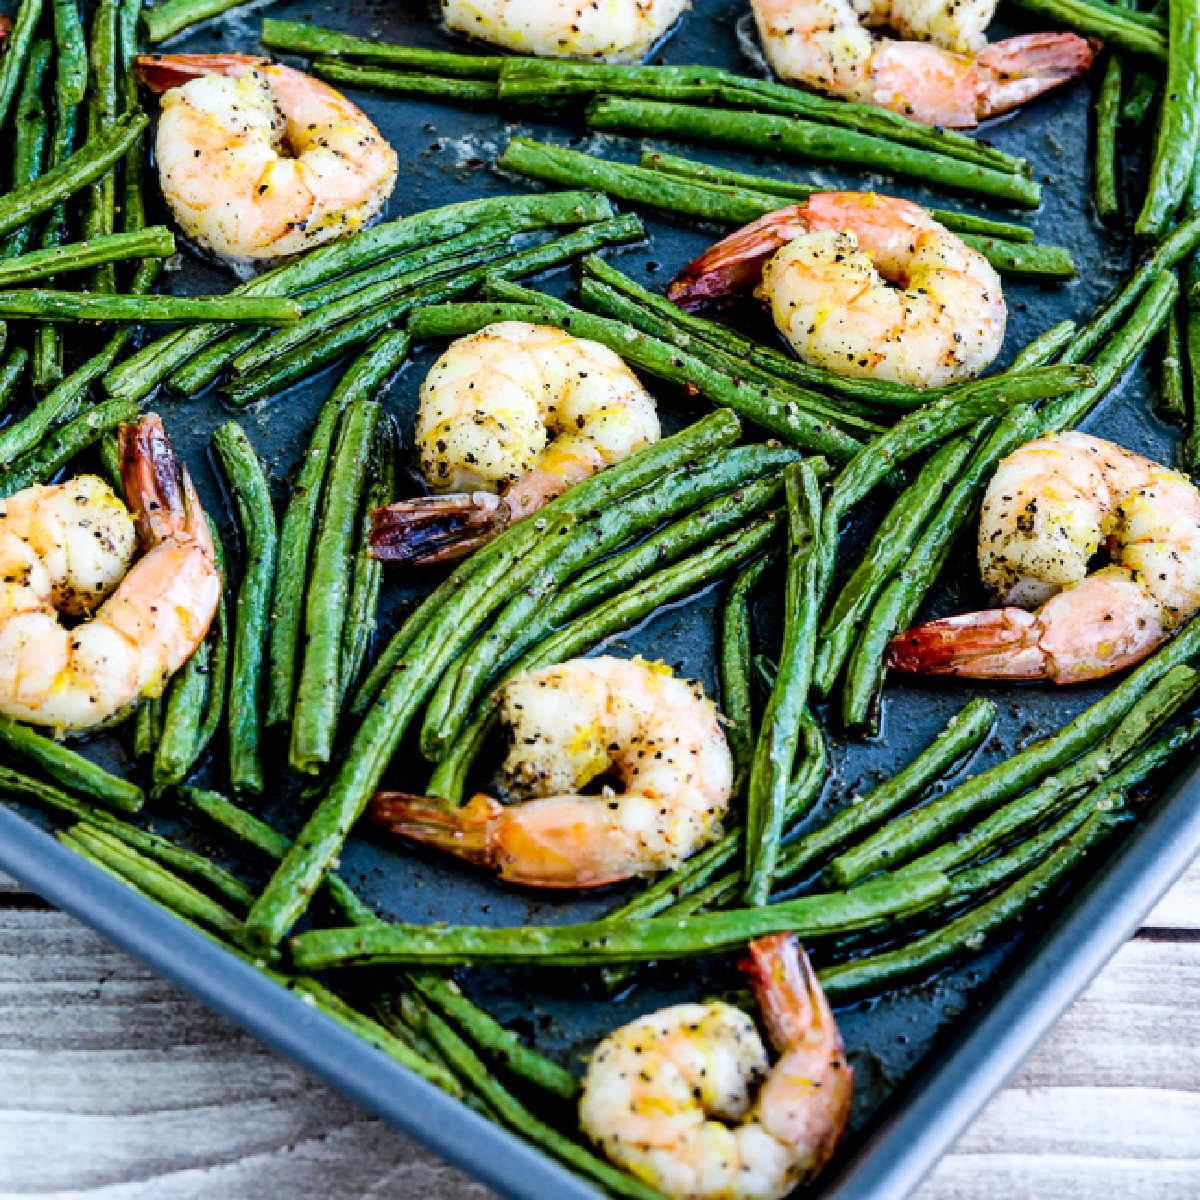 Square image for Spicy Green Beans and Shrimp Sheet Pan Meal shown on baking sheet.